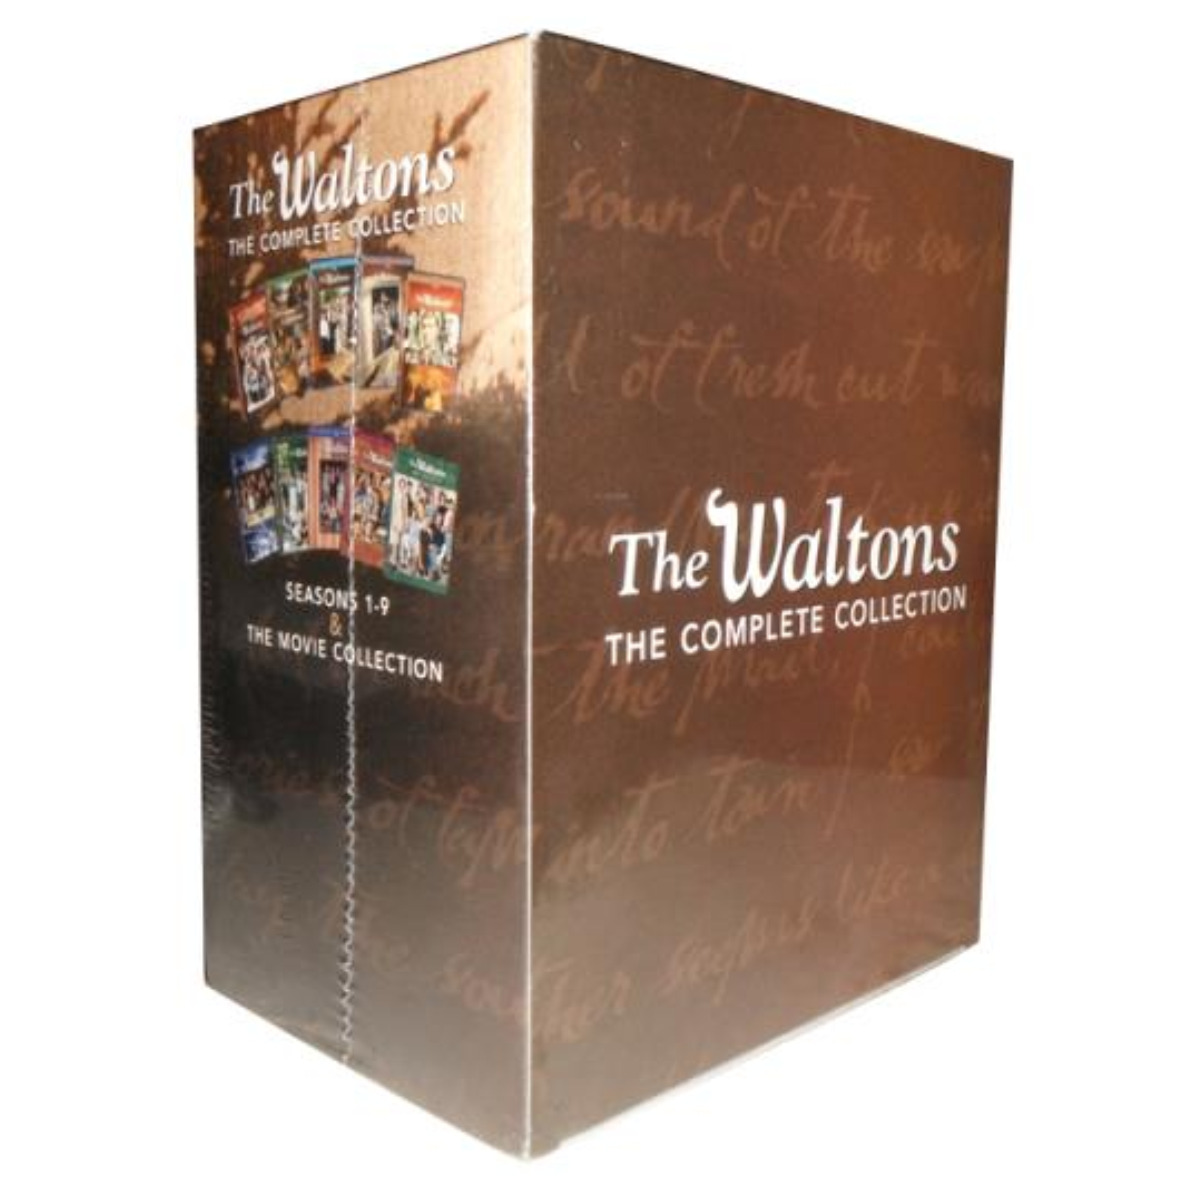 The Waltons: The Complete Series Season 1-9 (DVD, 45-disc)